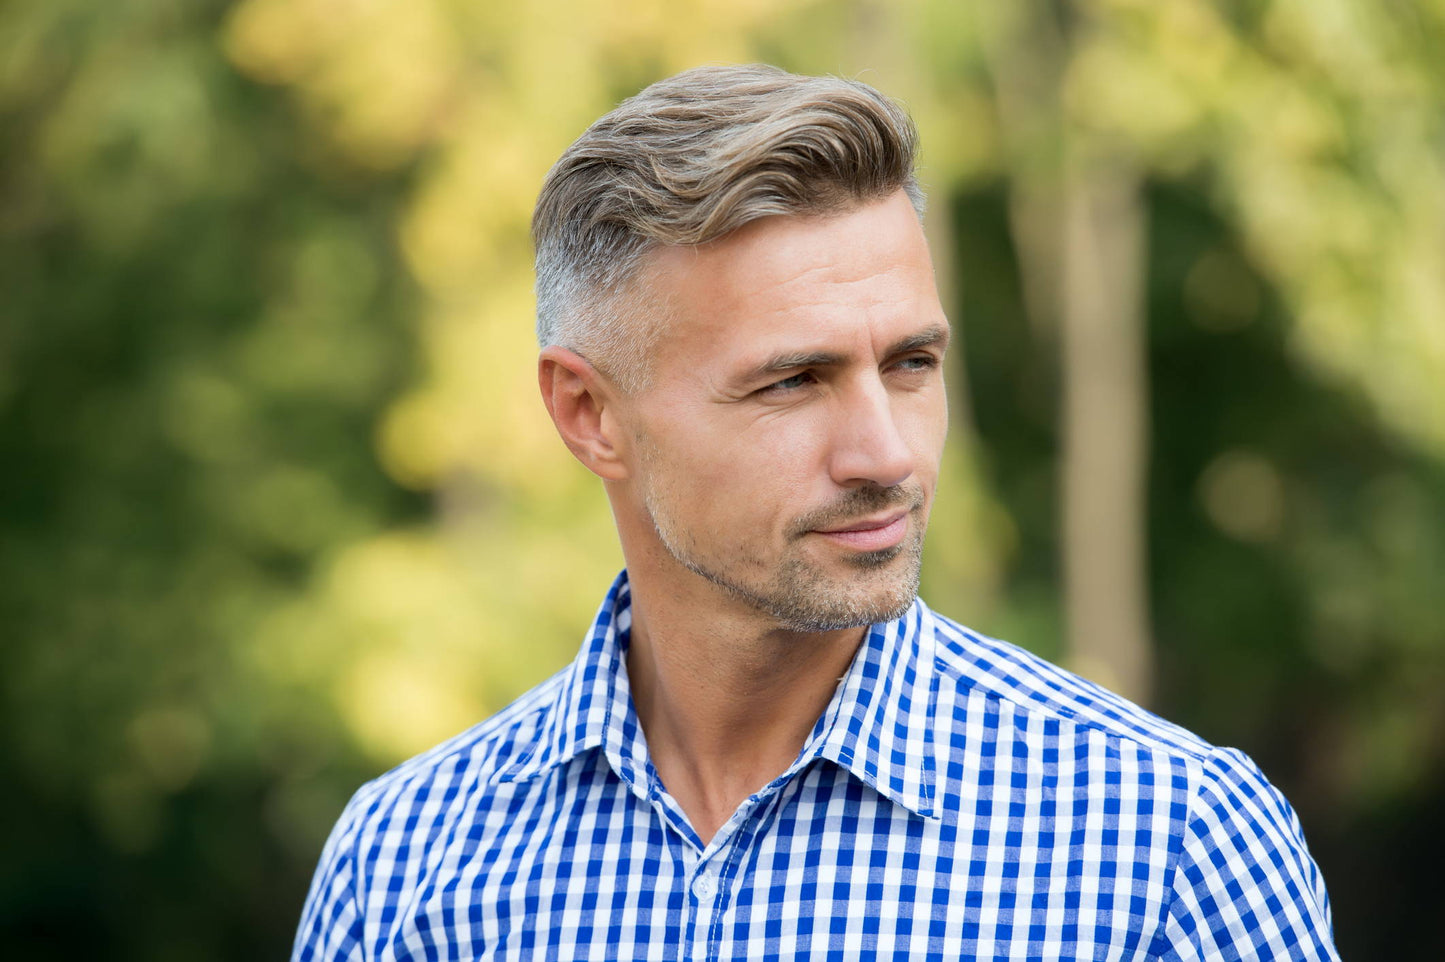 The 12 Most Attractive Hairstyles For Guys That Women Love (2018 Guide) | Mens  hairstyles, Men haircut styles, Haircuts for men